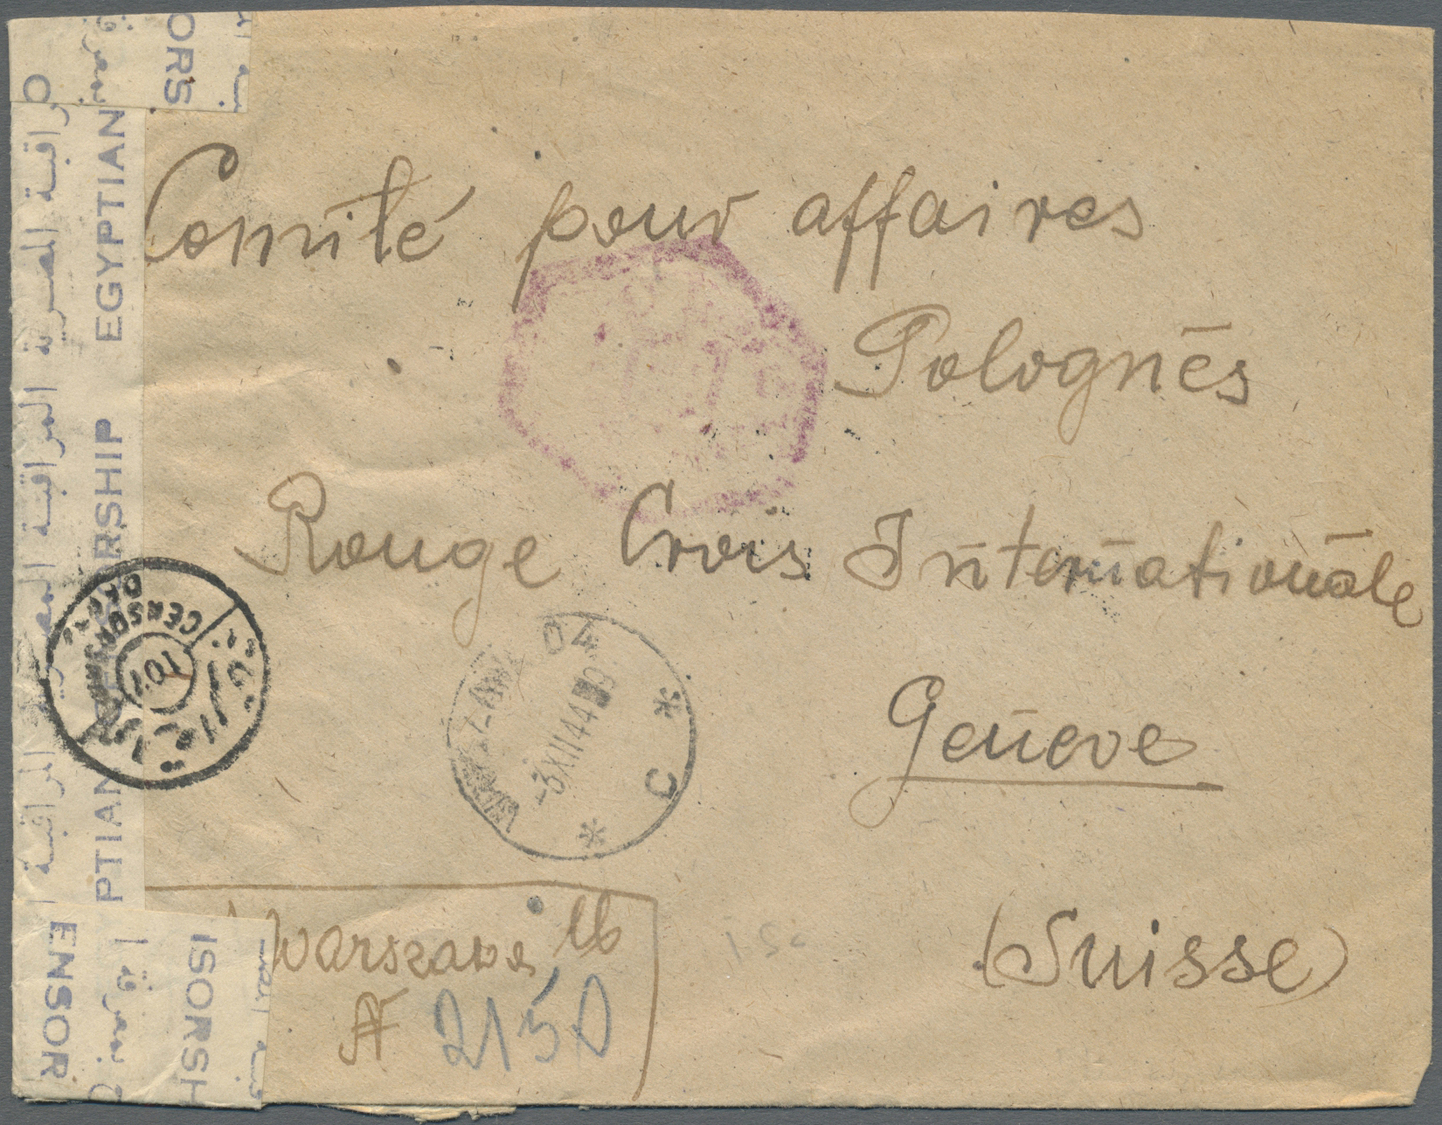 Br Polen: 1944. Registered Envelope Addressed To 'Committee Pour Affaires Polognes, Croix Rouge International, Ge - Lettres & Documents